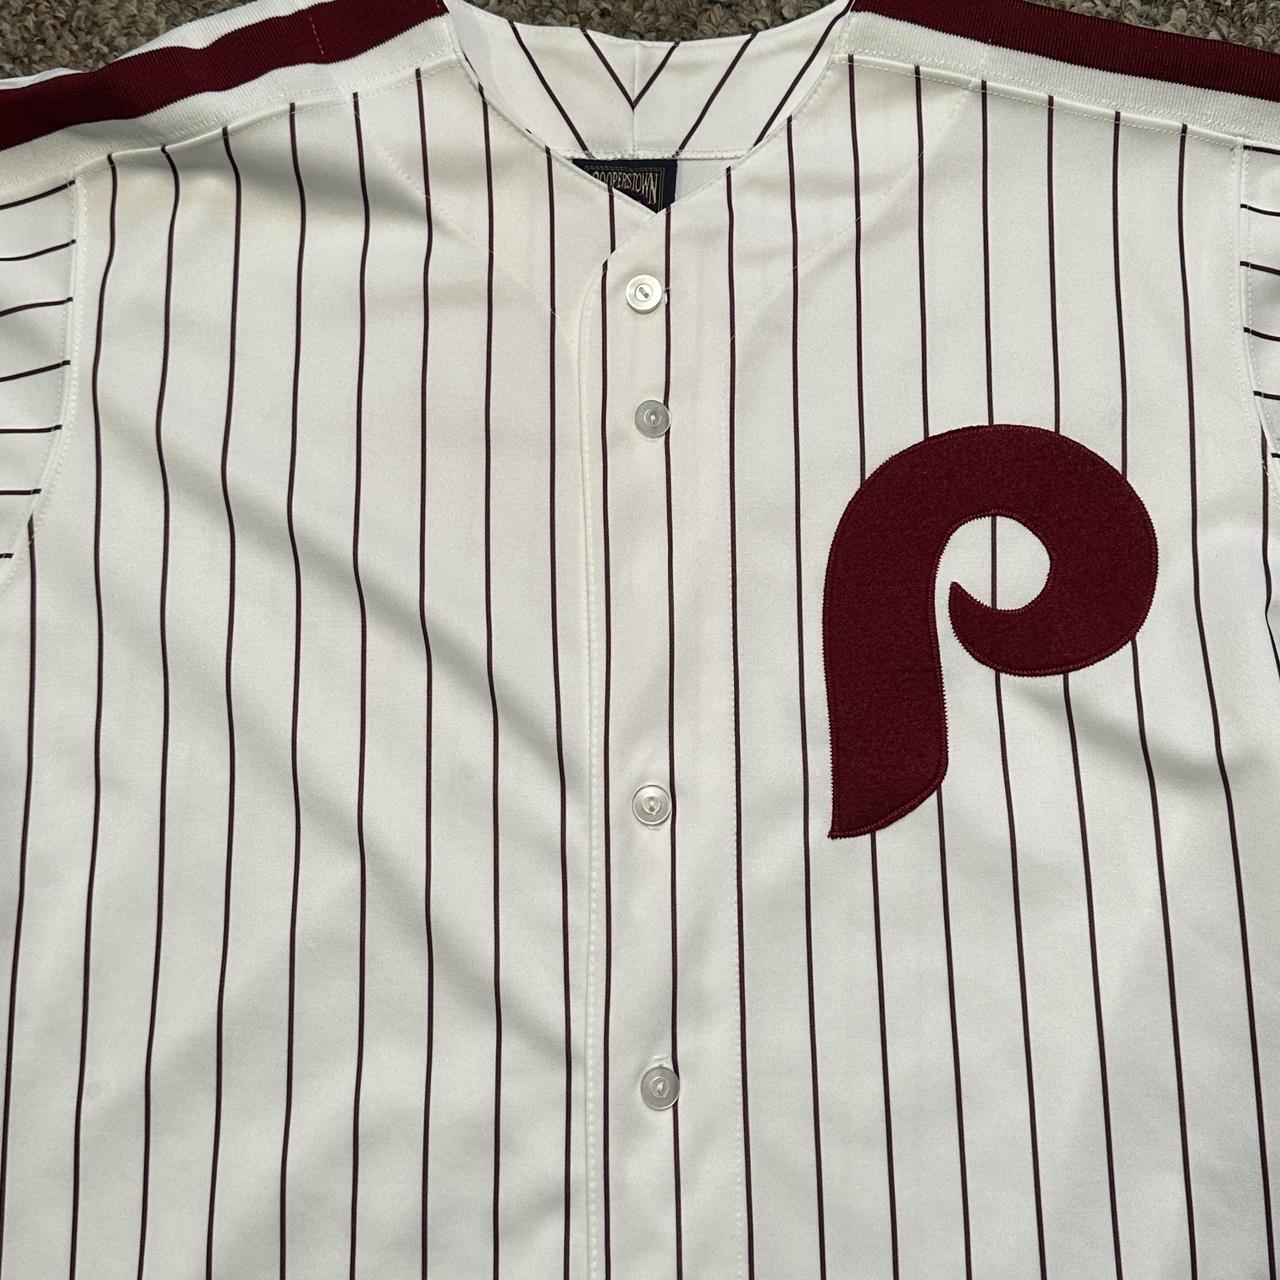 Majestic, Shirts, Phillies Cooperstown Jersey